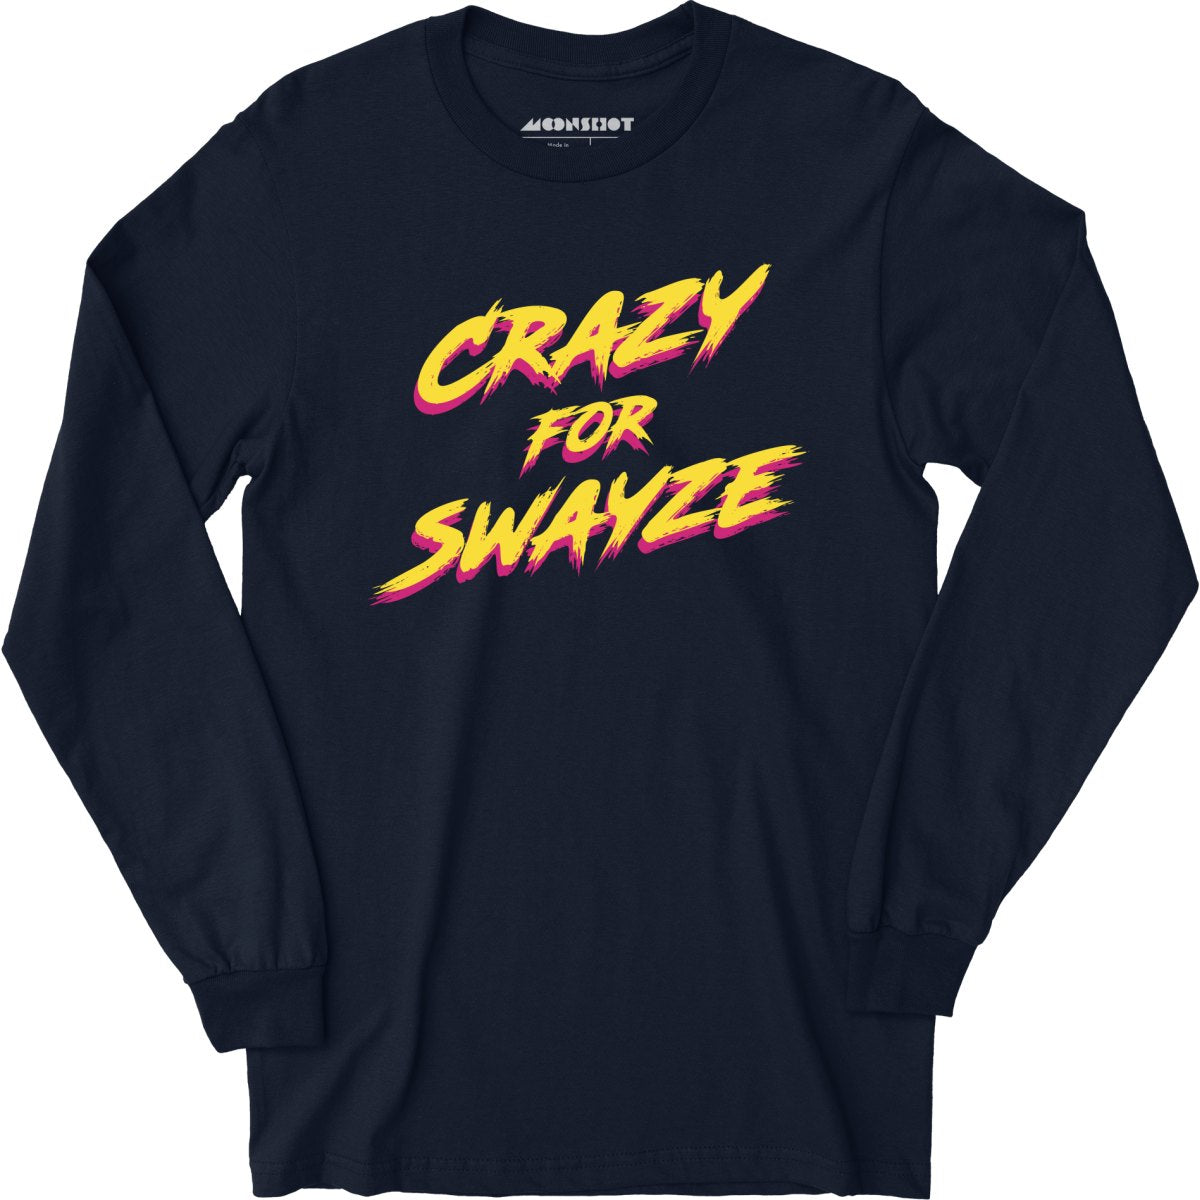 Crazy for Swayze - Long Sleeve T-Shirt